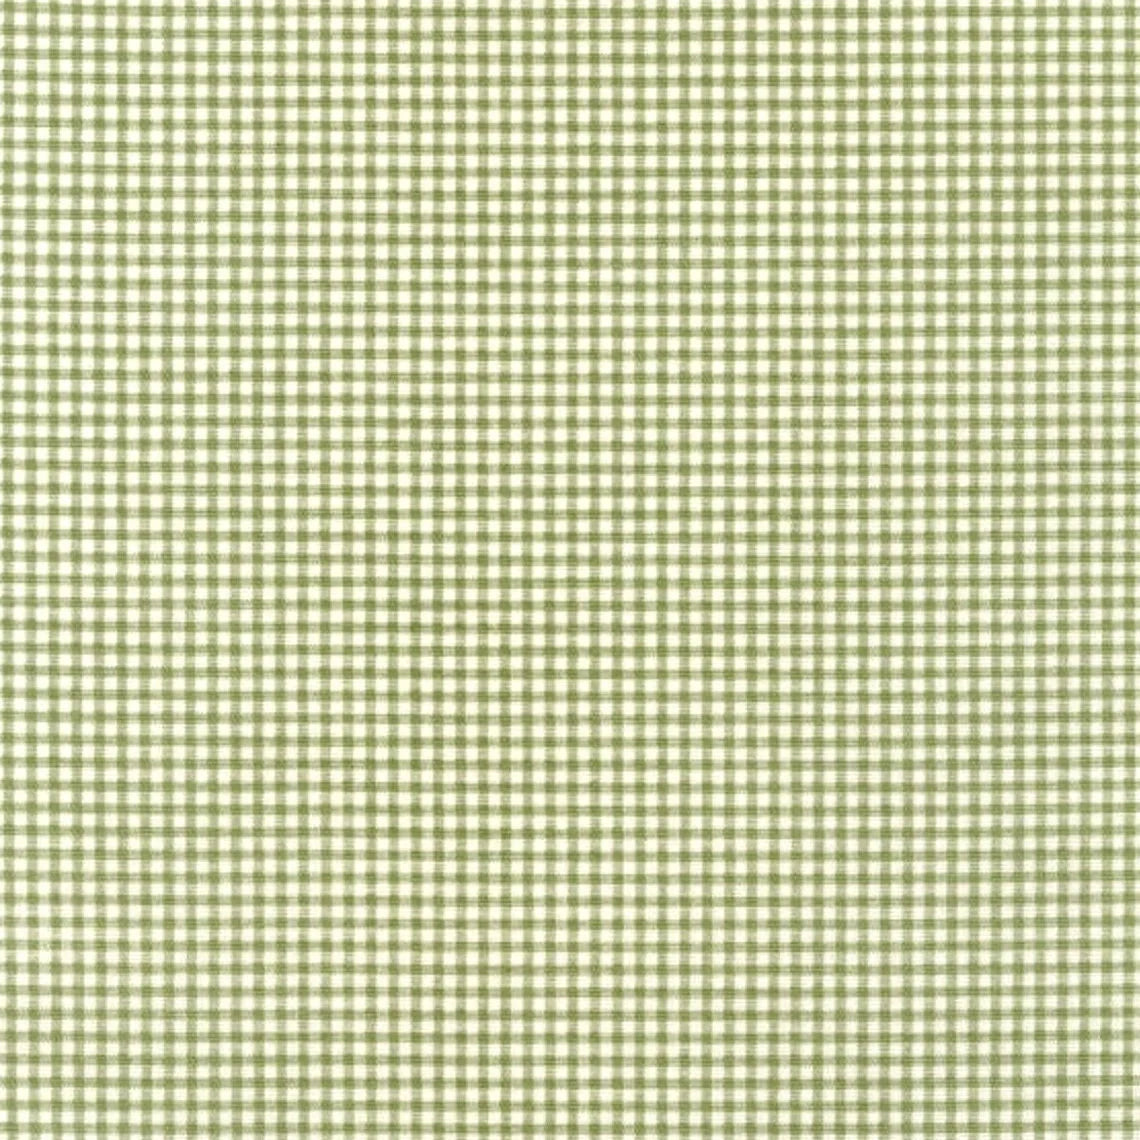 tailored bedskirt in farmhouse jungle green gingham check